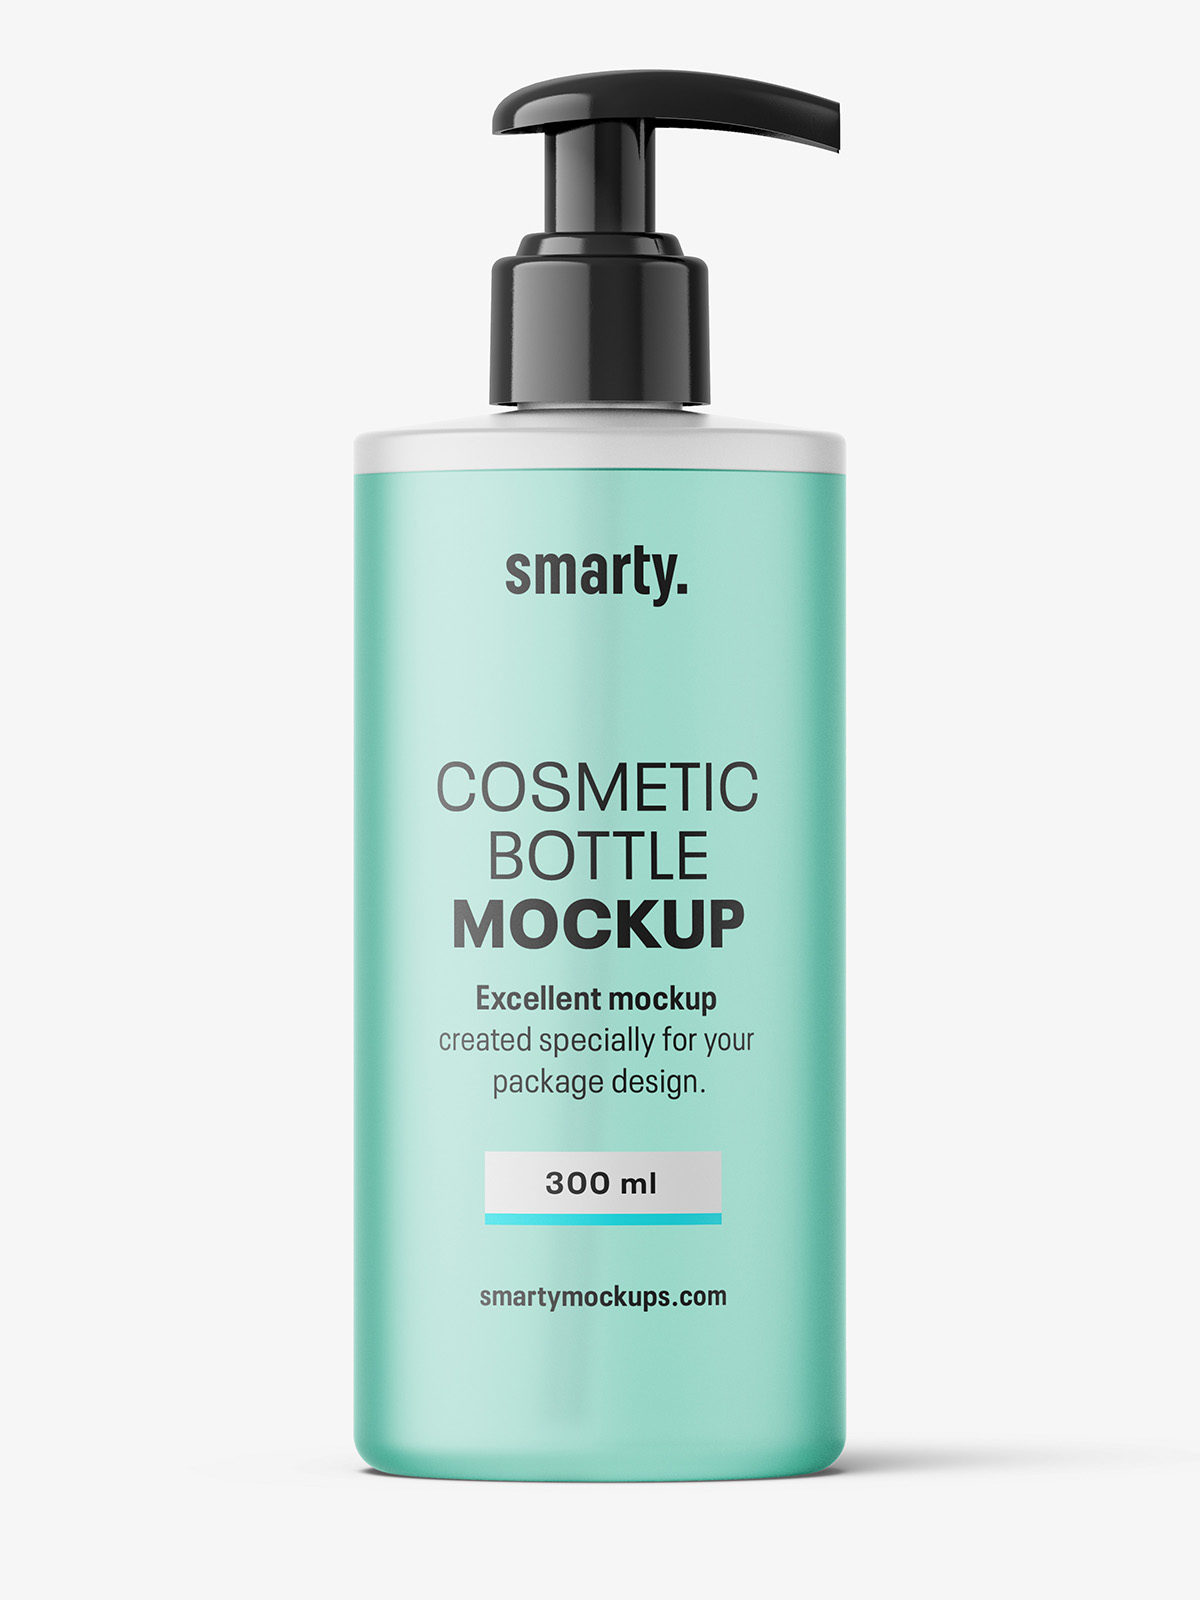 Frosted bottle with pump mockup / 300 ml - Smarty Mockups